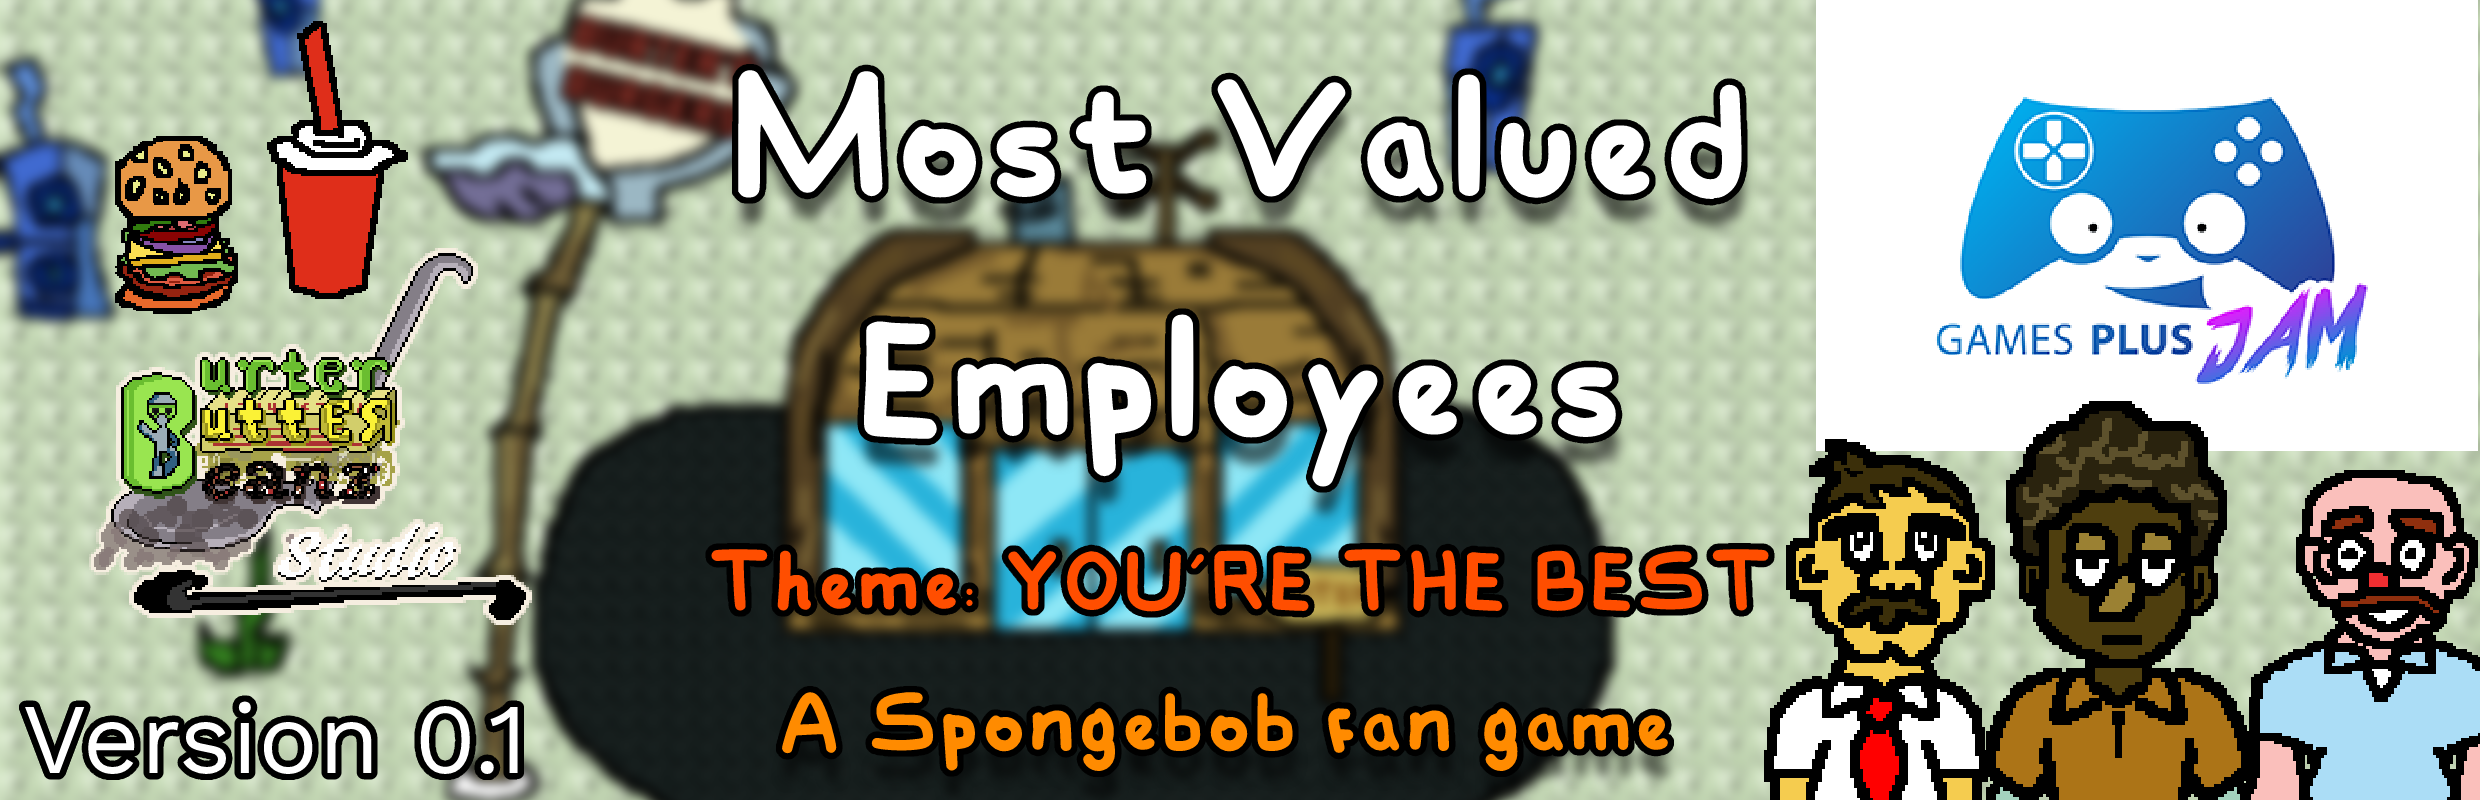 Most Valued Employee